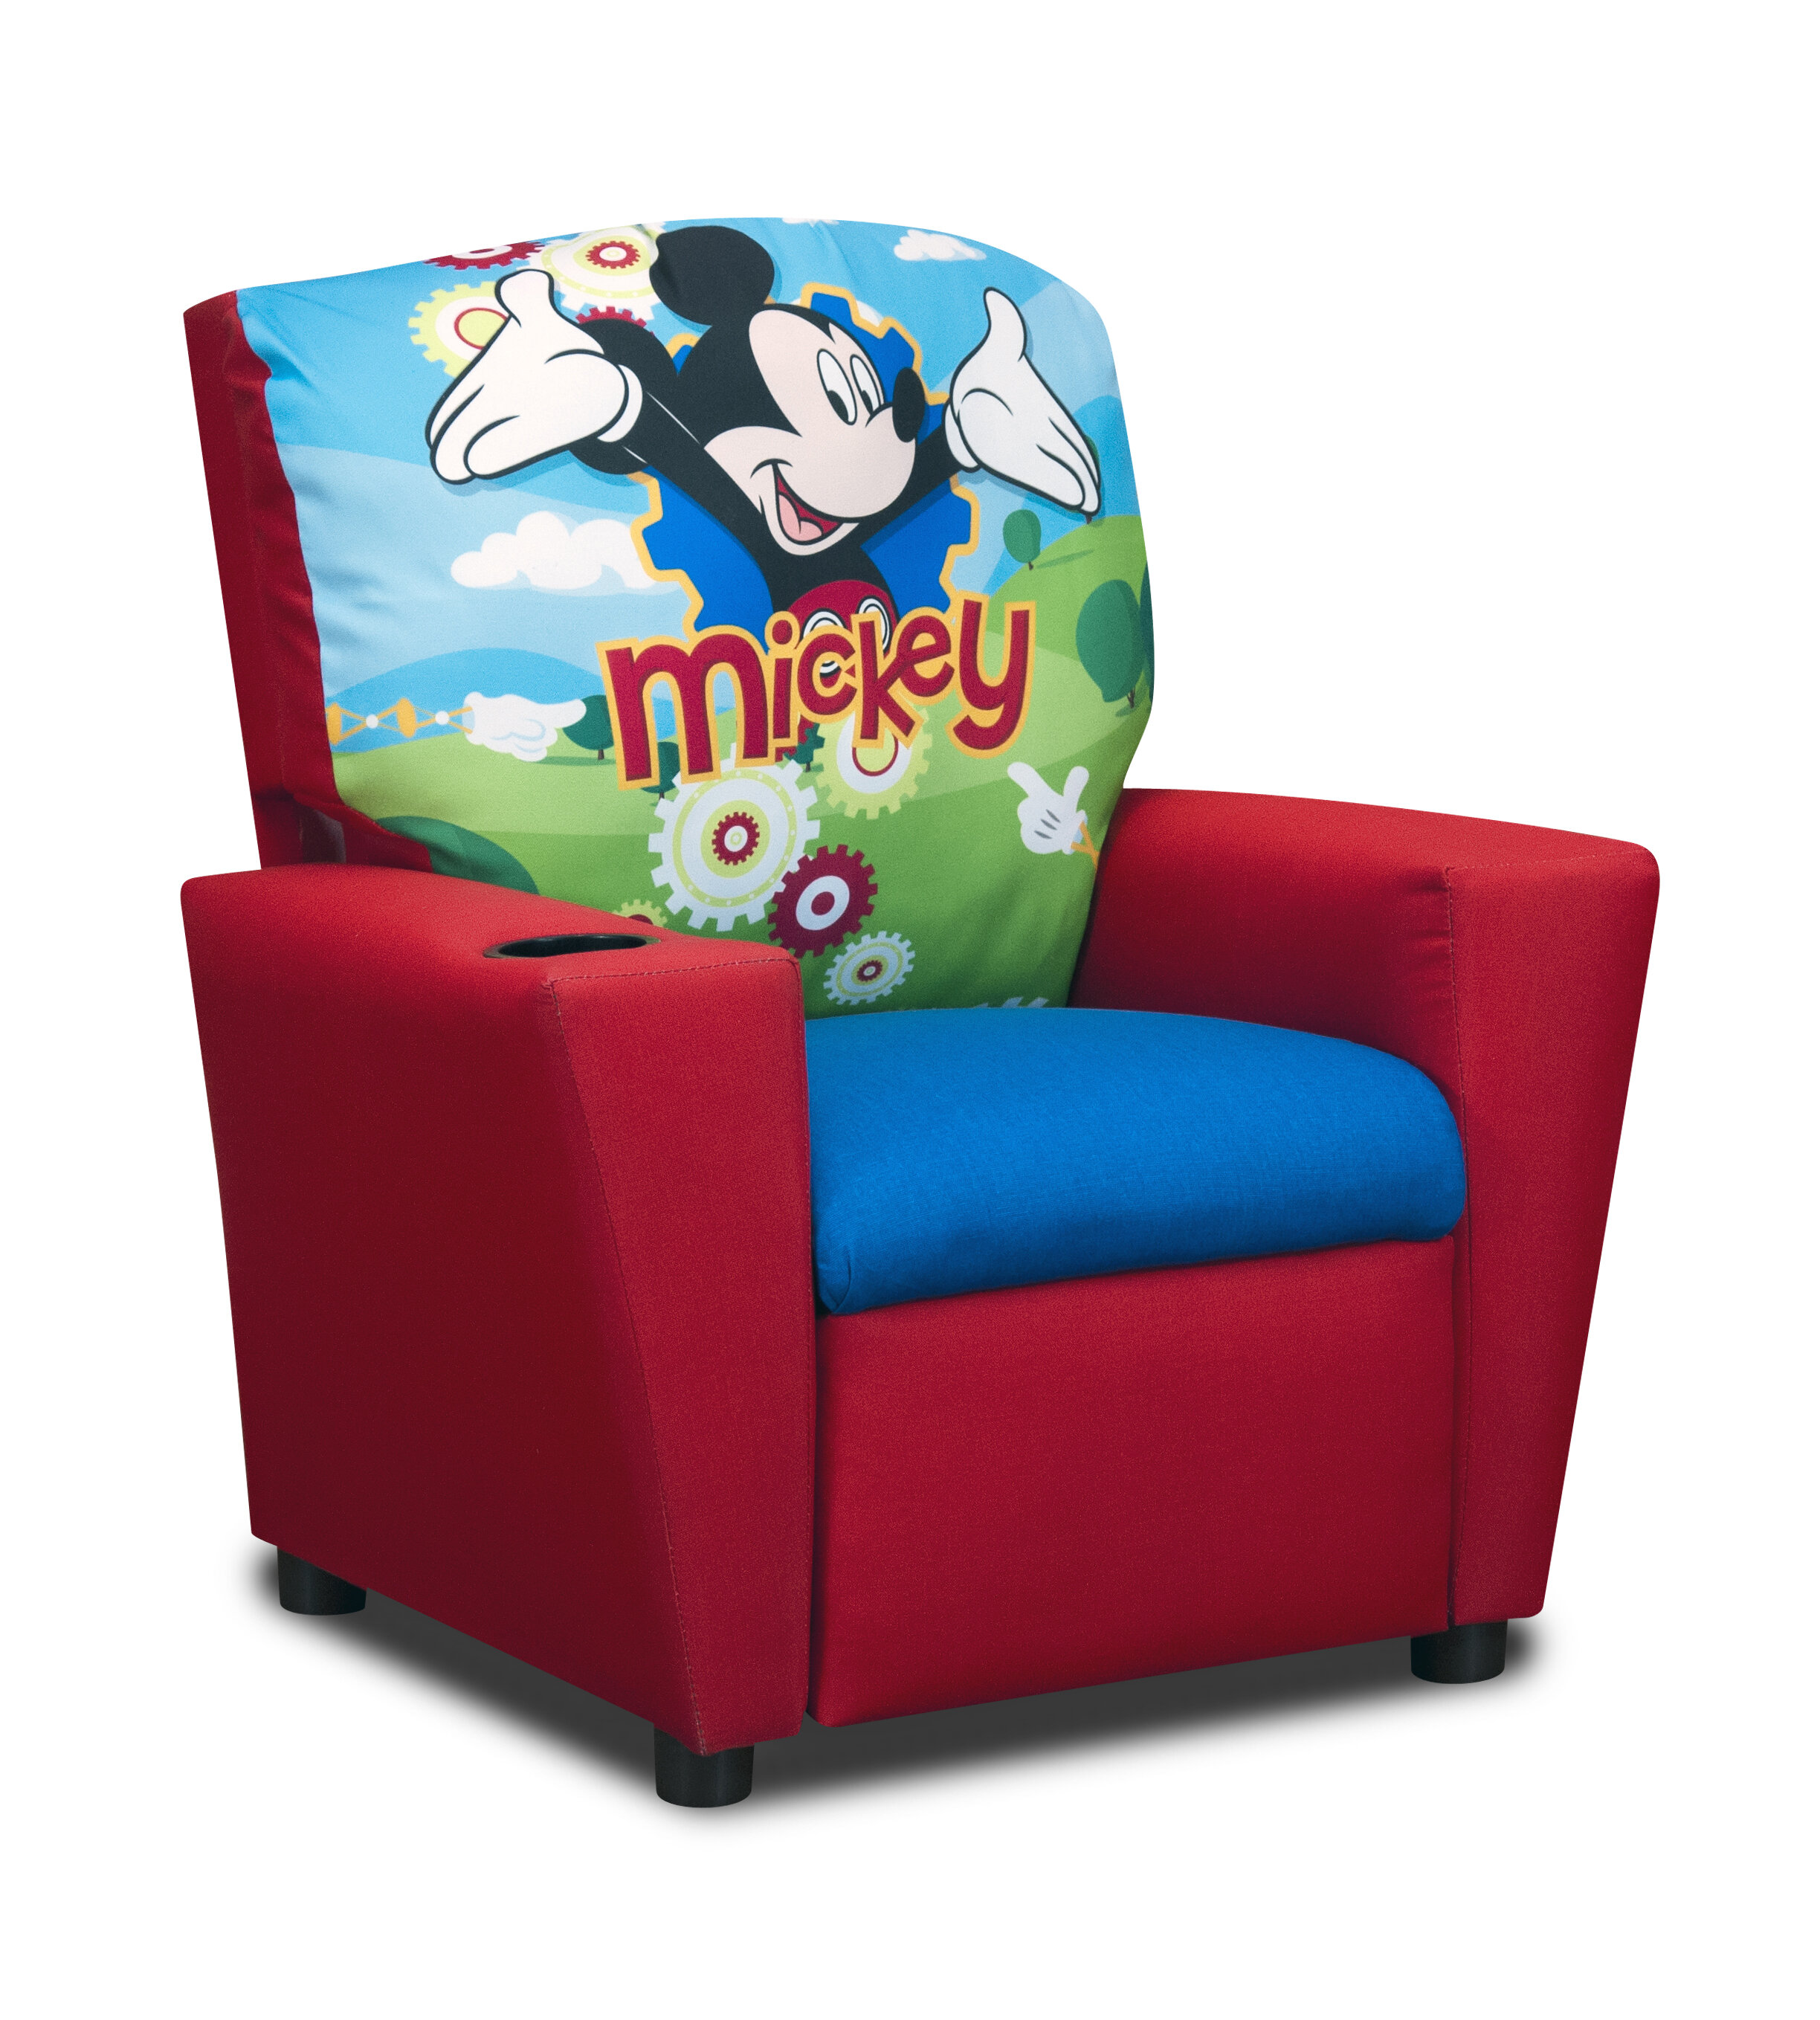 Upholstered Kids Sofa Chair Disney Mickey Mouse for Kids Toddler Room Furniture